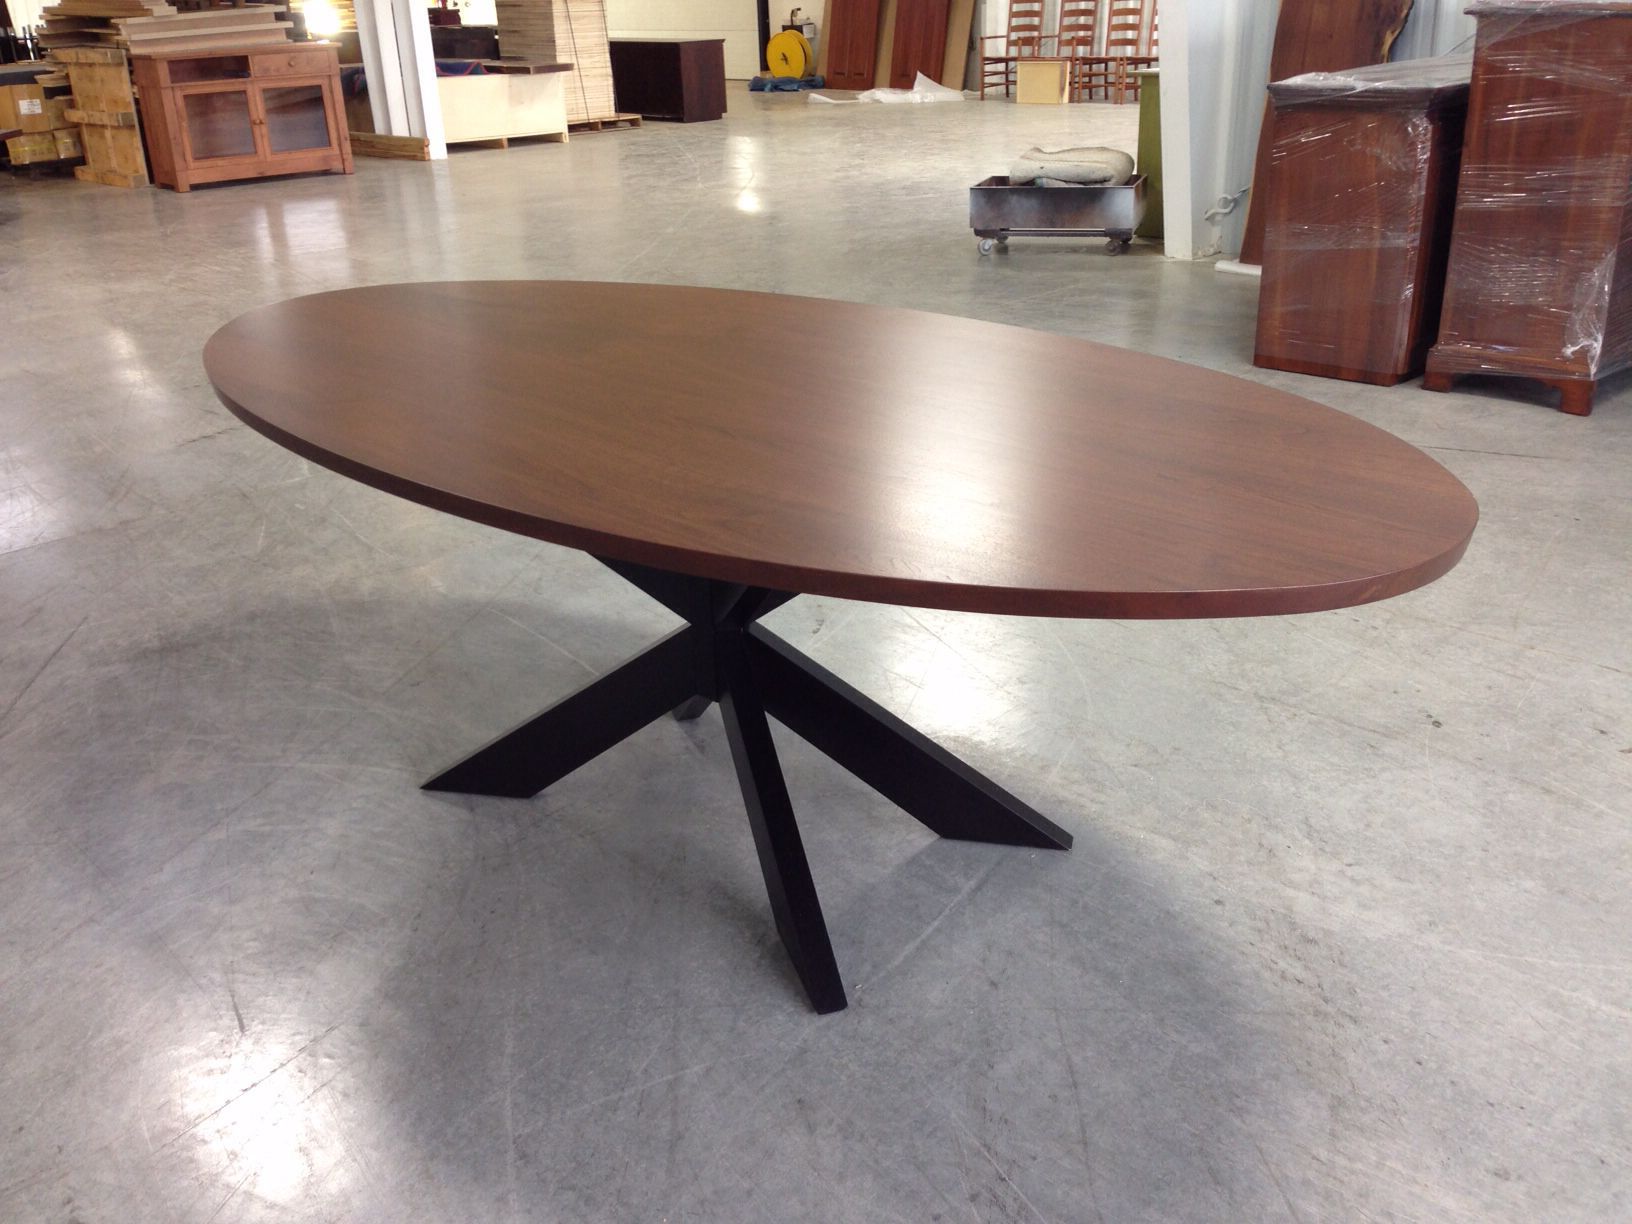 Geneve Maple Solid Wood Pedestal Dining Tables Within Favorite The Michigan Avenue Dining Table Solid Walnut Oval Top (View 6 of 20)